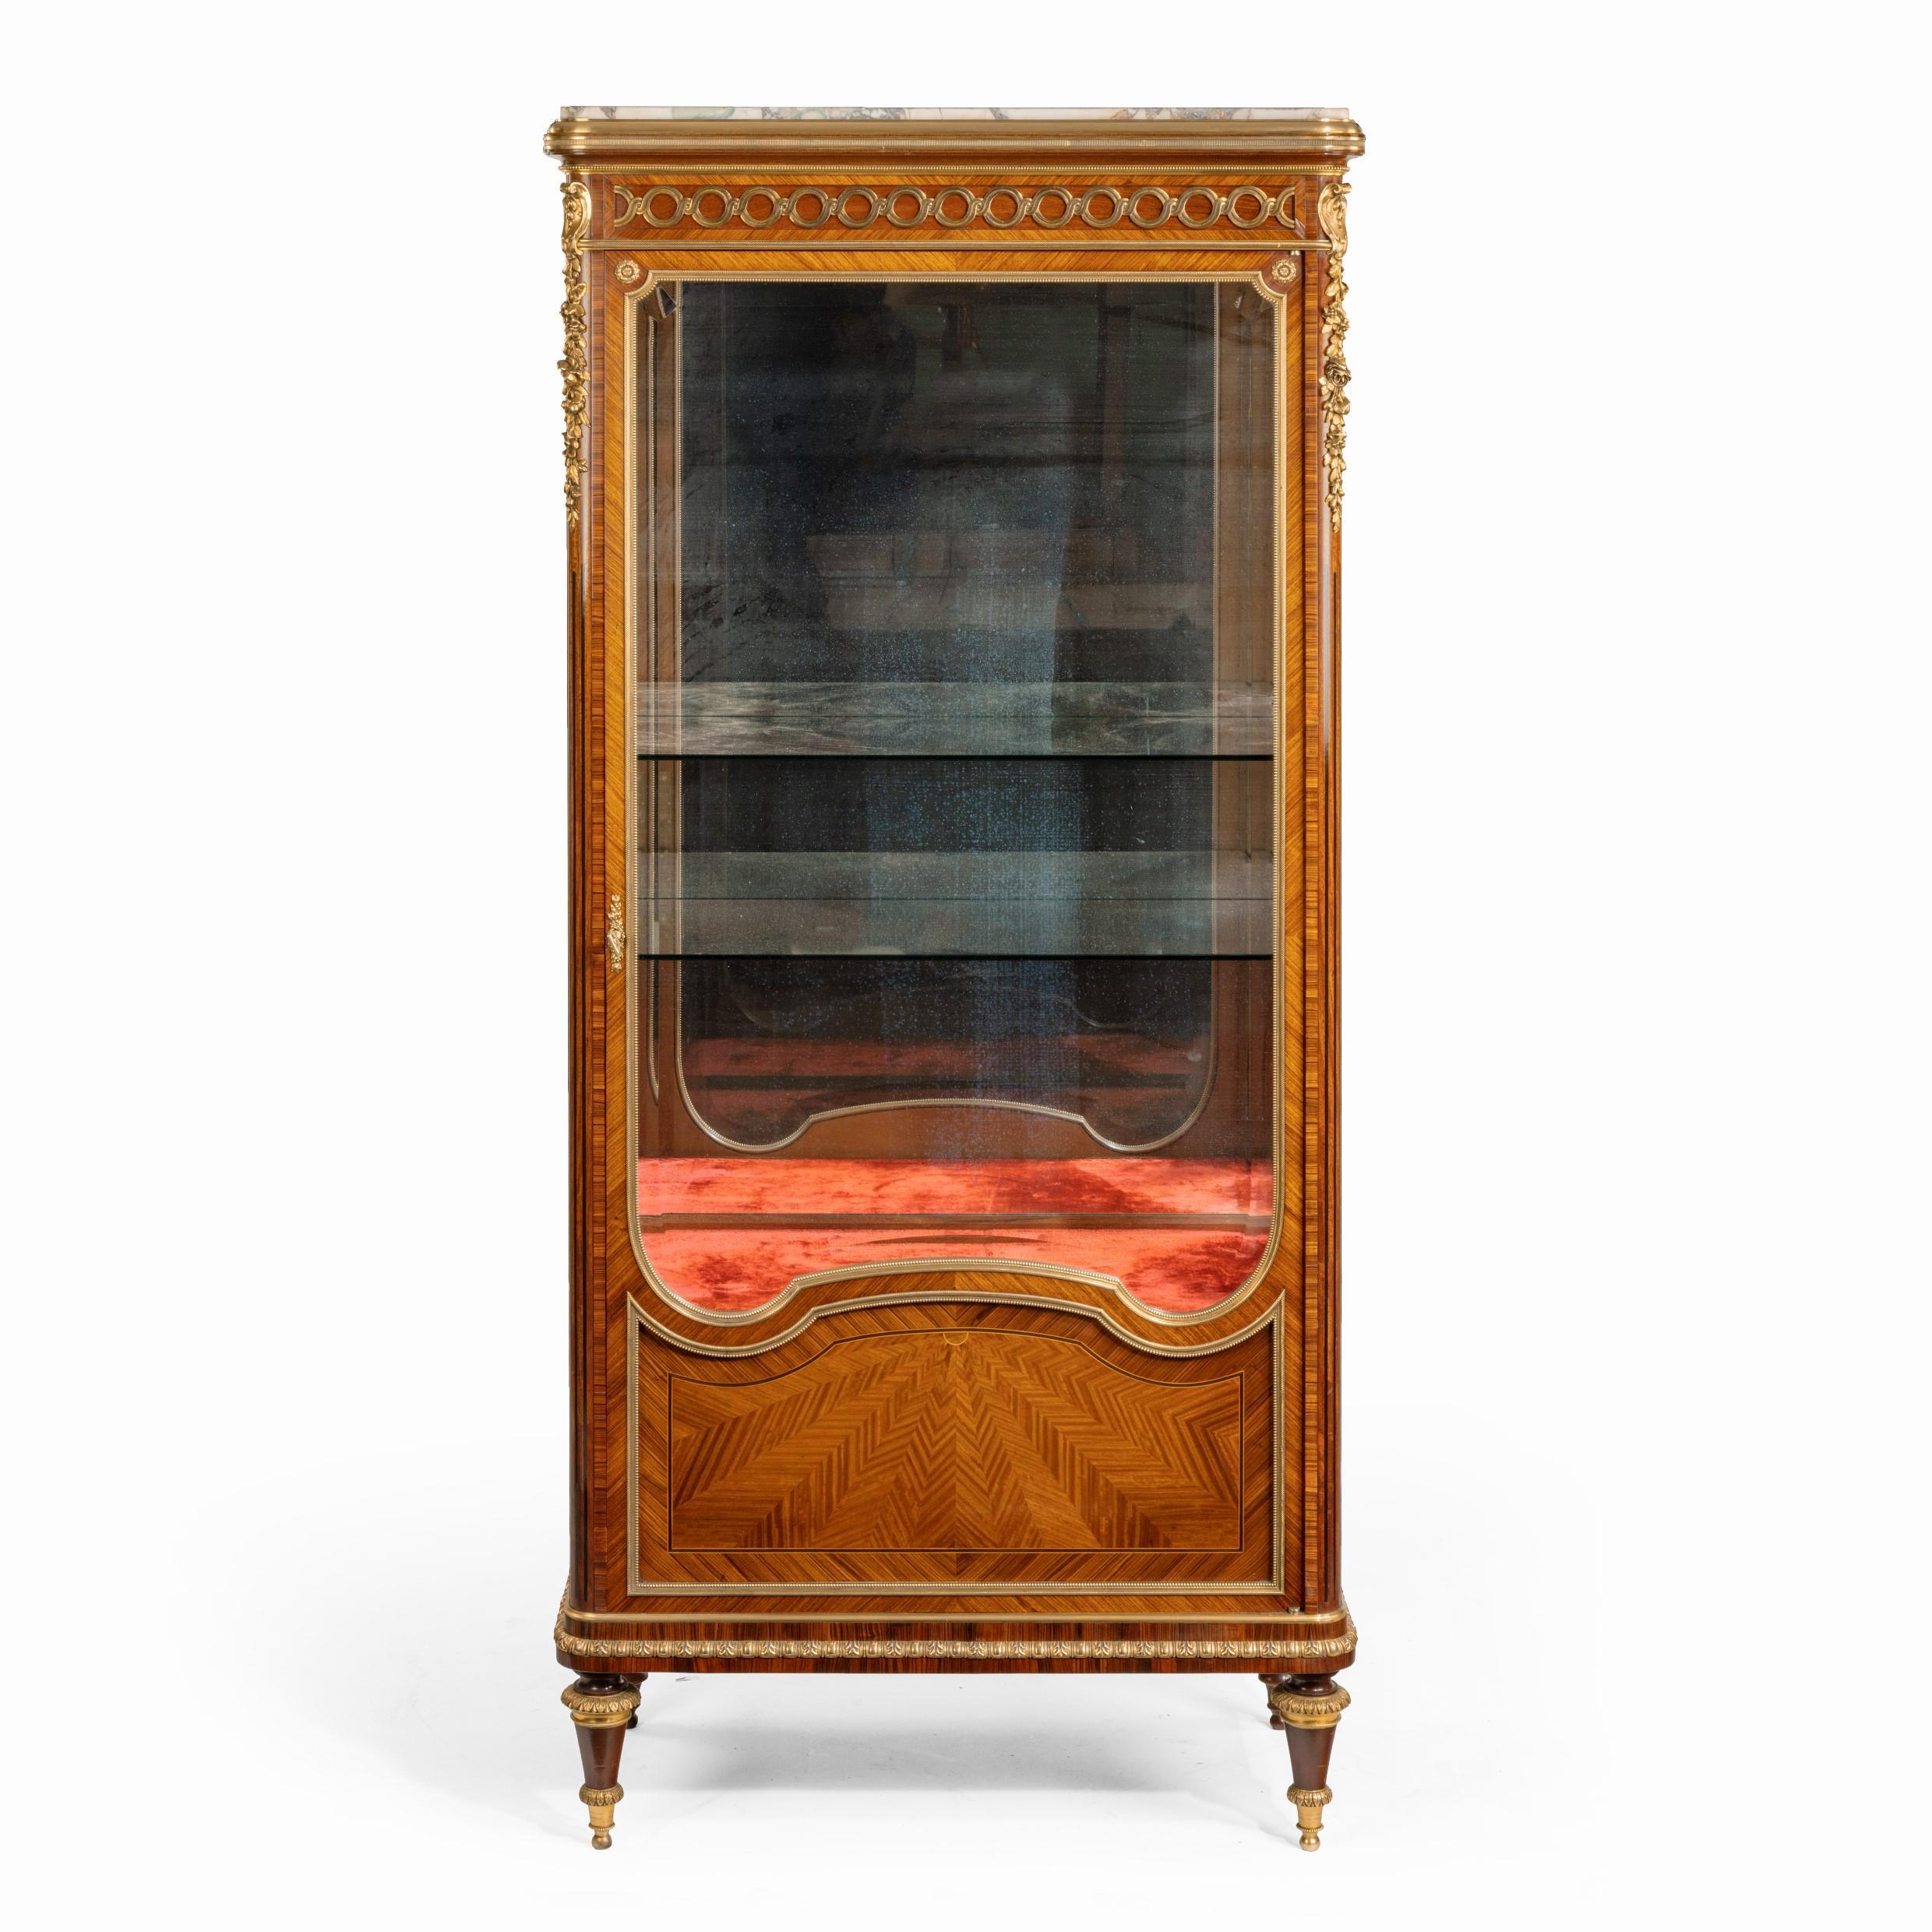 A kingwood display cabinet by Haentges Frères, of tall rectangular form, the single door three-quarters glazed above a shaped parquetry panel of radiating herring-bone cross-banding, enclosing a cupboard and two glass shelves, all raised on turned